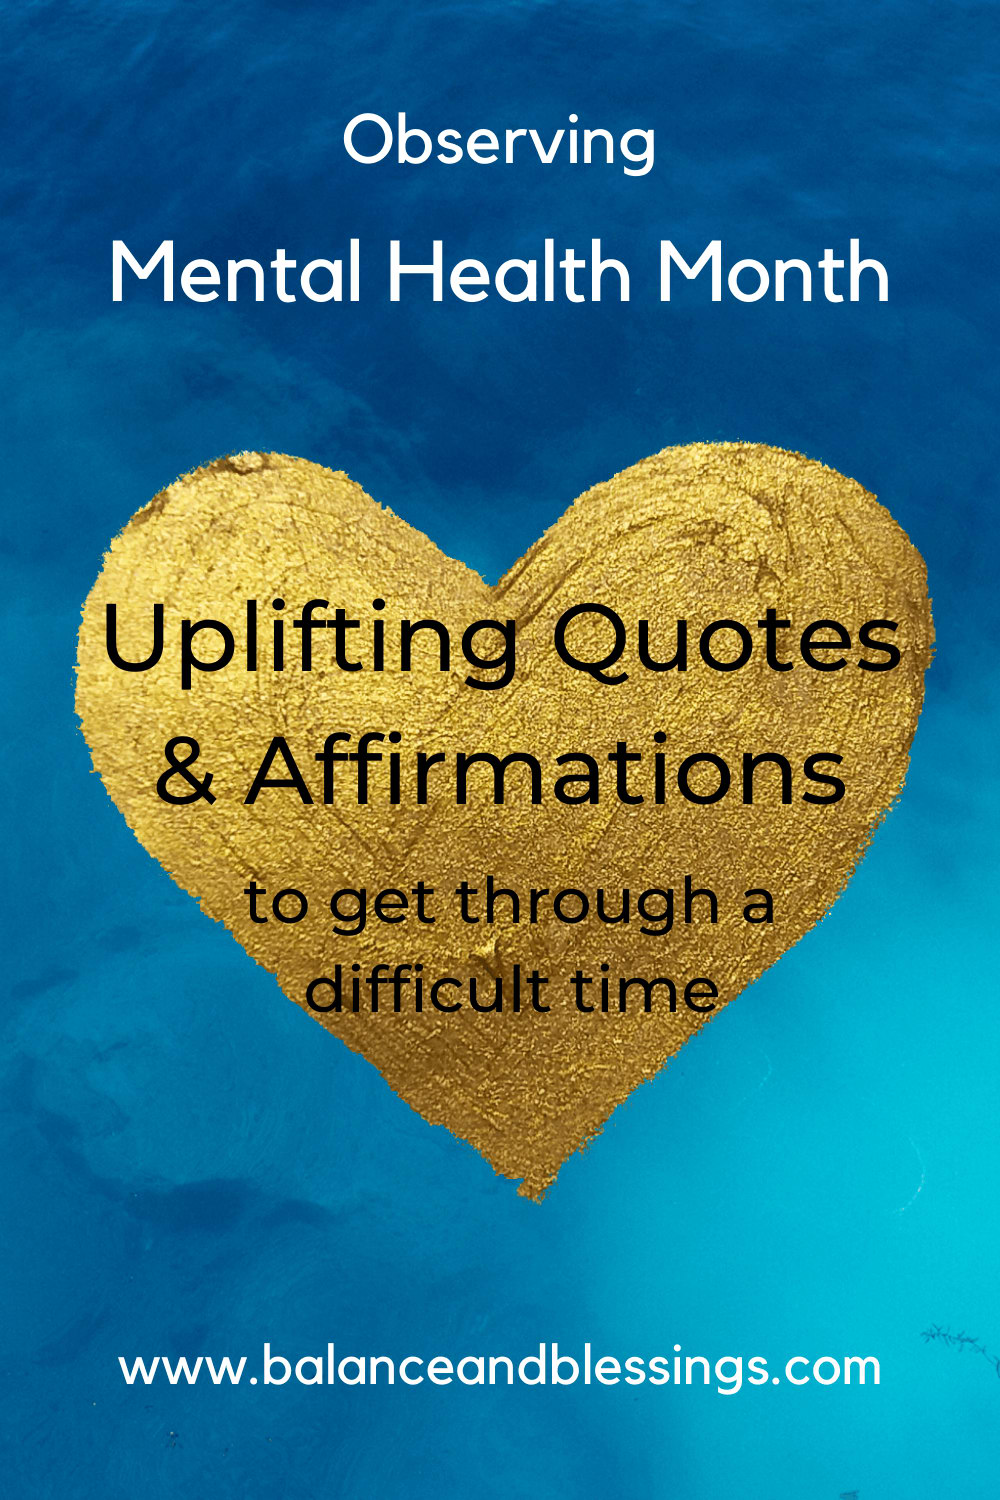 Uplifting quotes & affirmations to get through a difficult time - Balance & Blessings